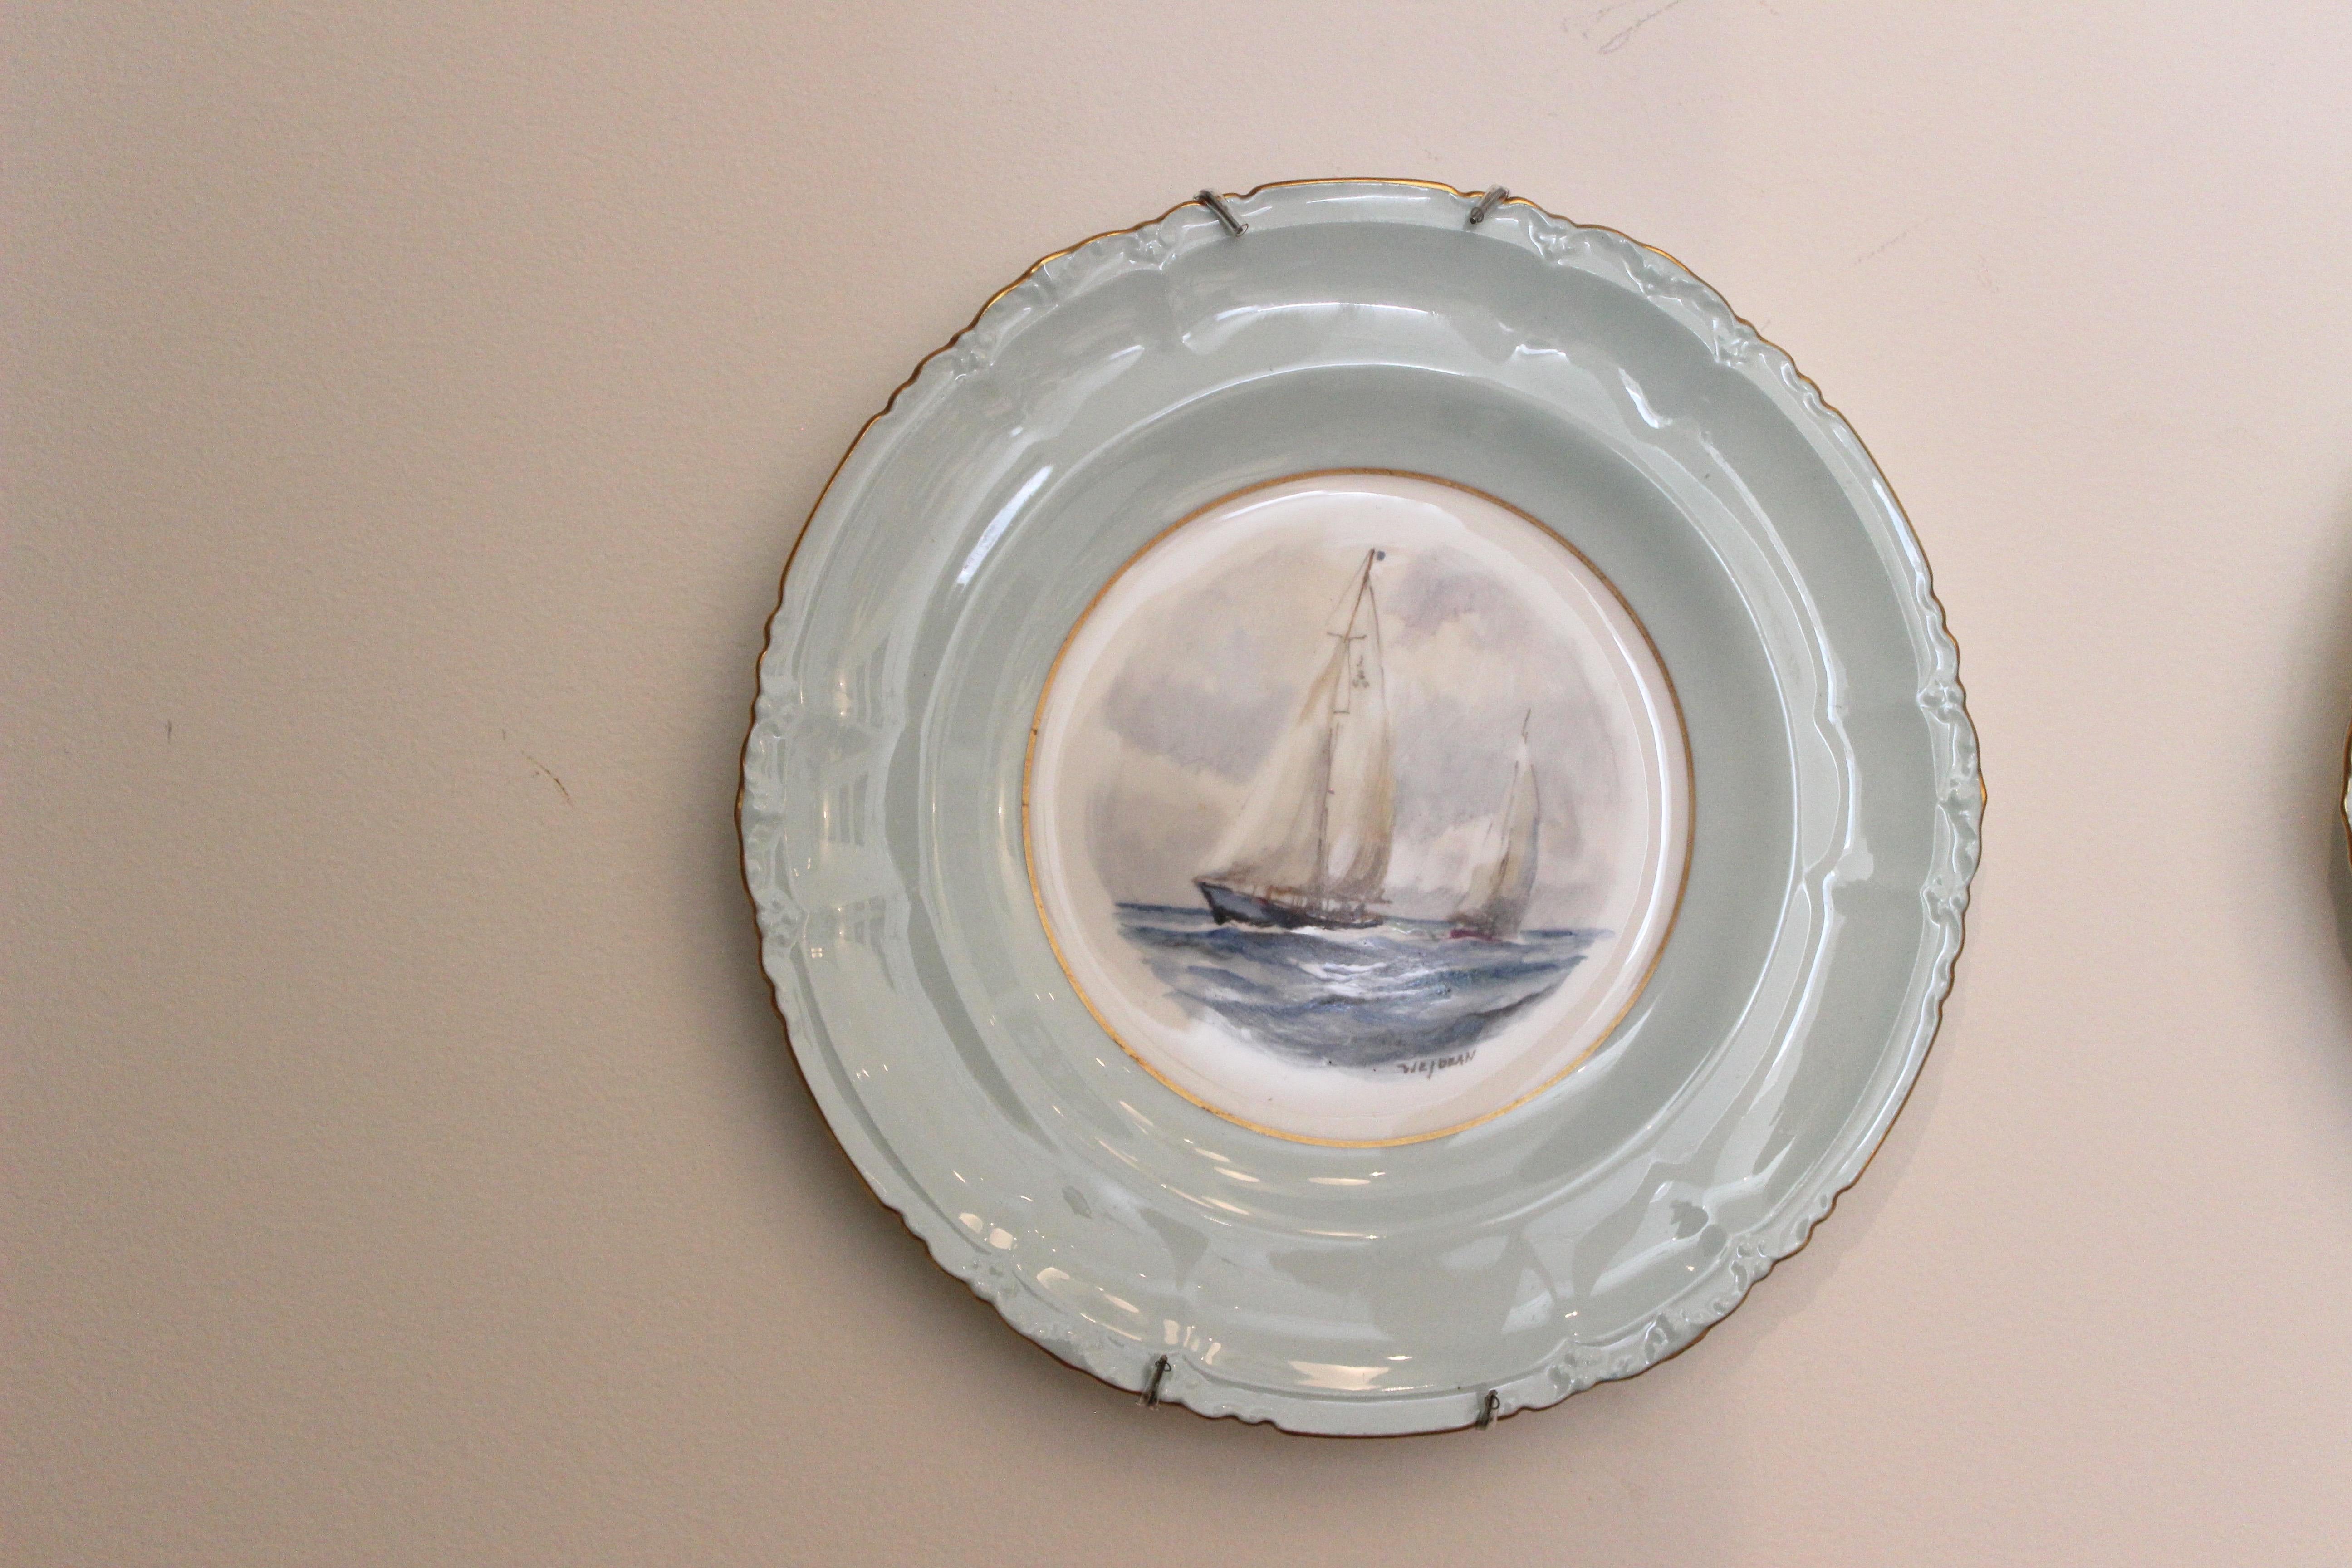 Hand-Painted Set of 12 Royal Crown Derby Porcelain Plates with Yachting Scenes